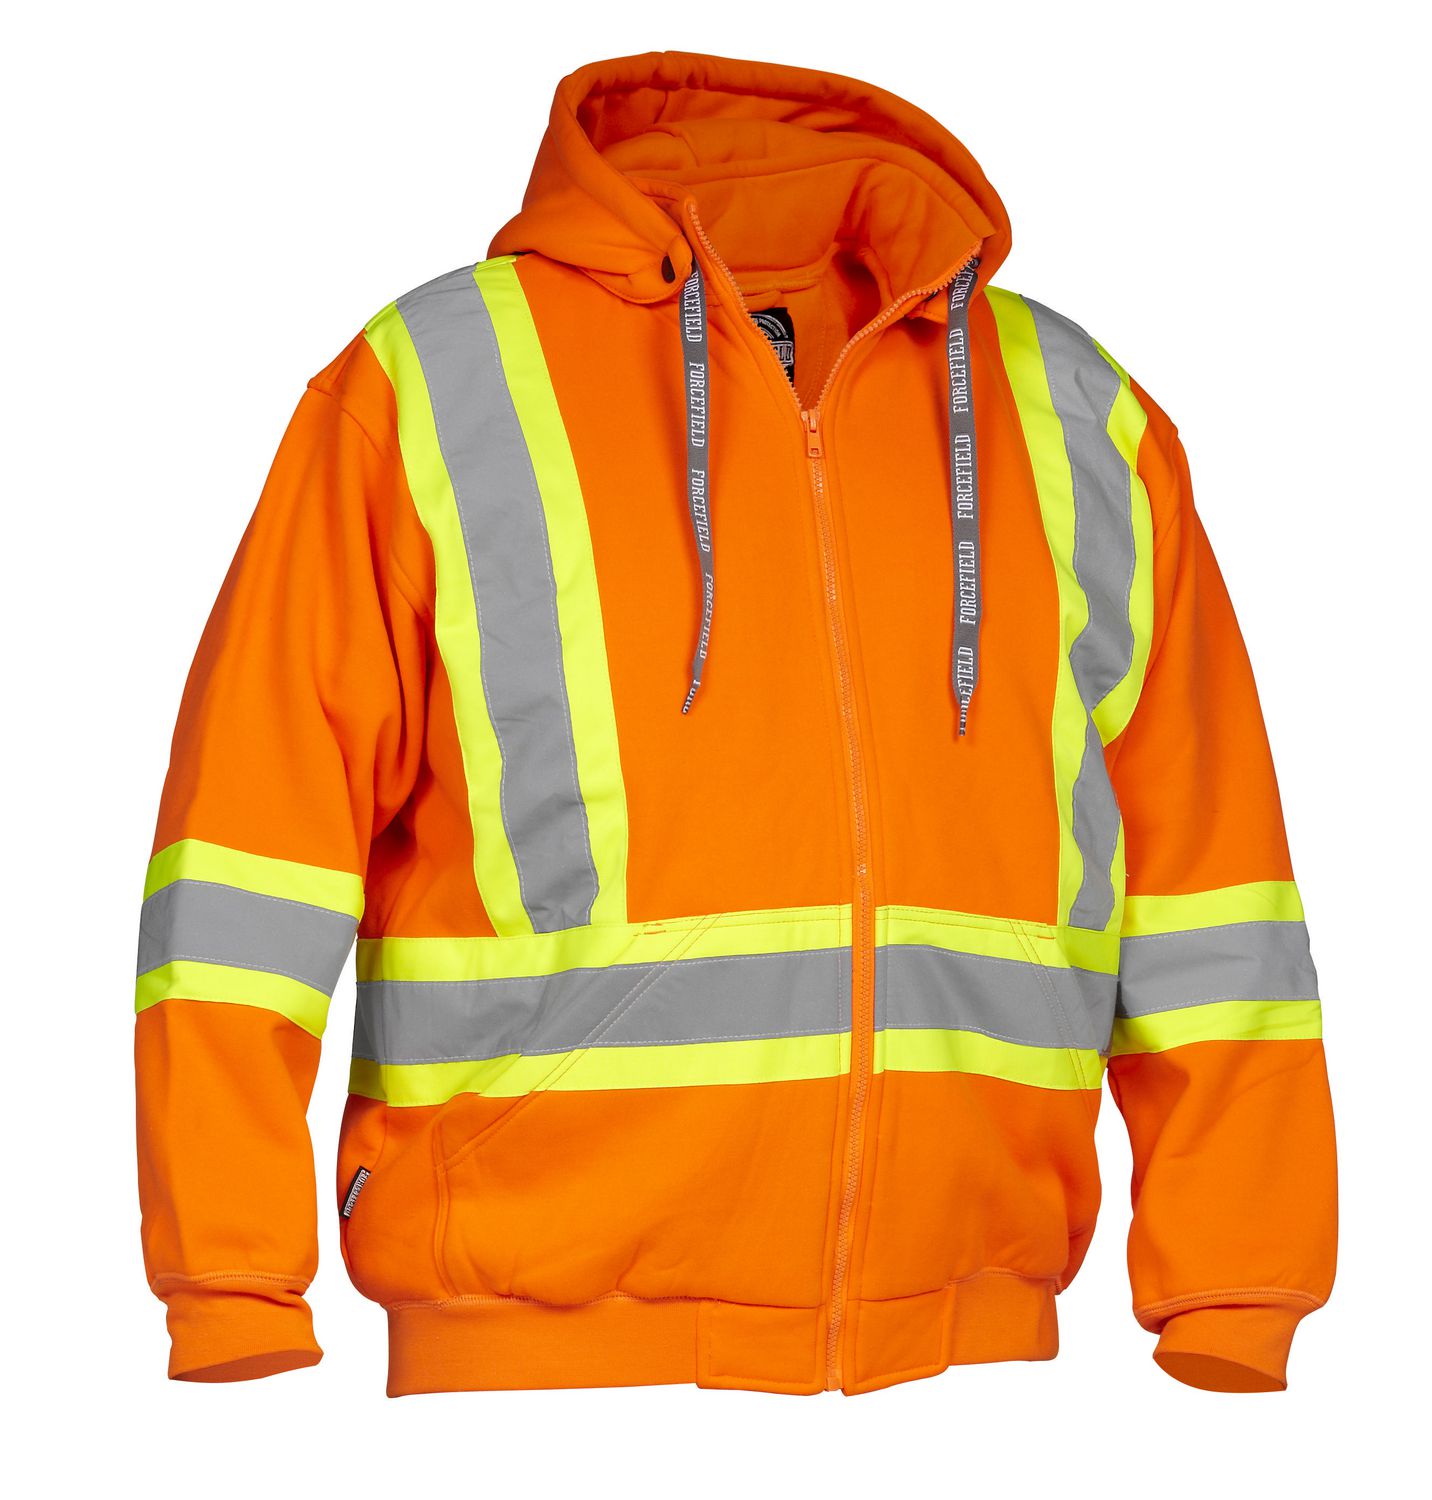 Forcefield Force Field Hi-Visibility Safety Detachable Hoodie | Walmart ...